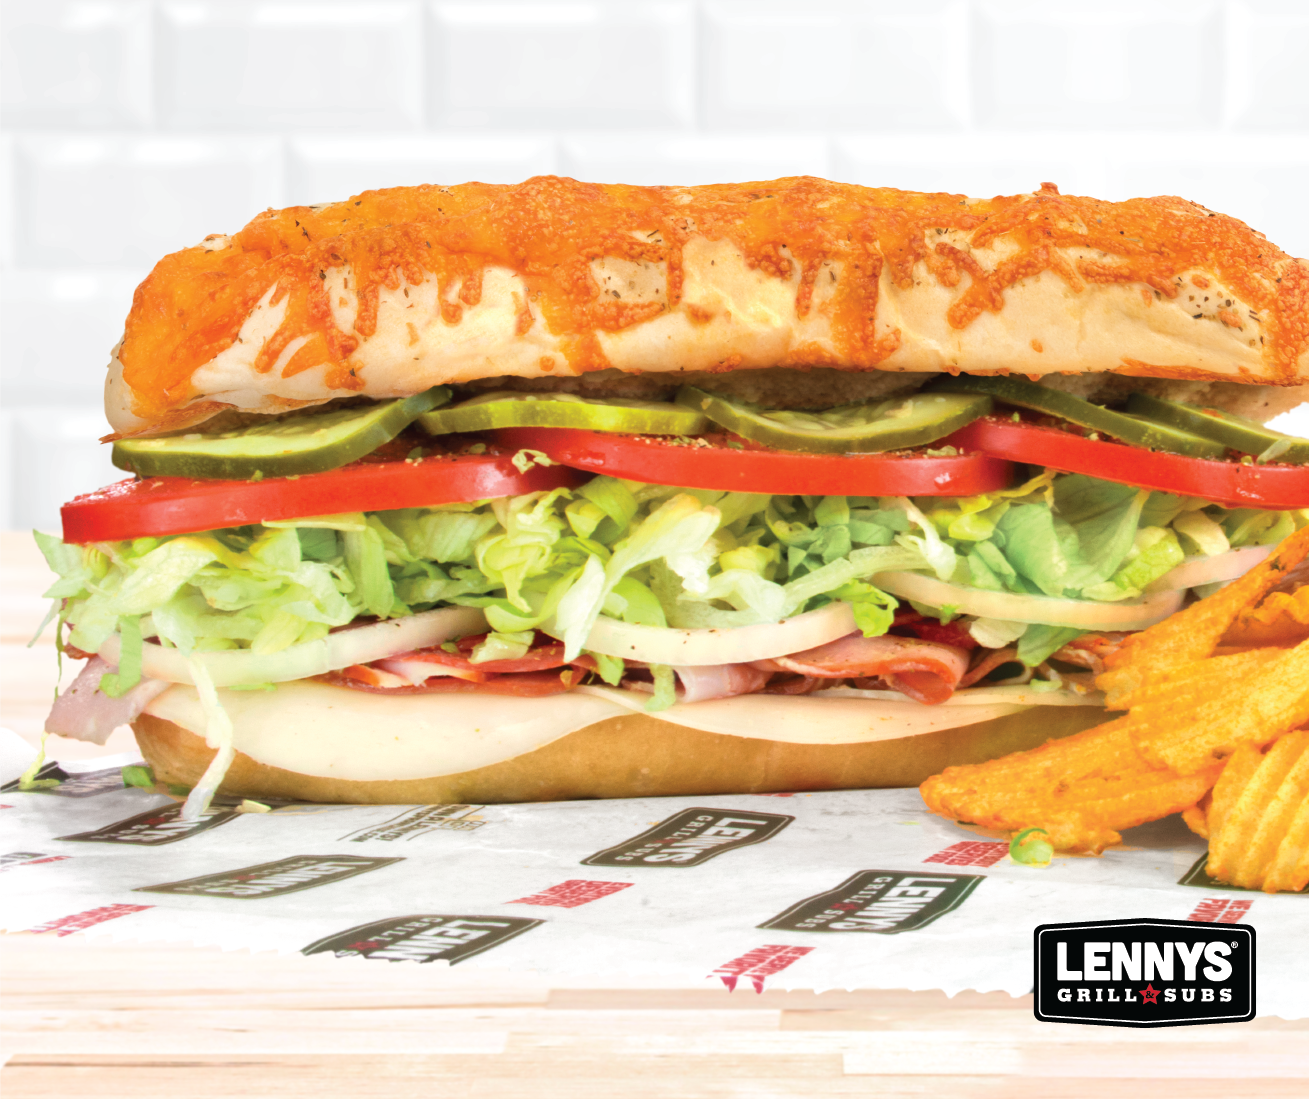 Lennys Grill & Subs is adding Cheddar Bread to its fresh-baked bread selections for a limited time only through September 30, 2023.